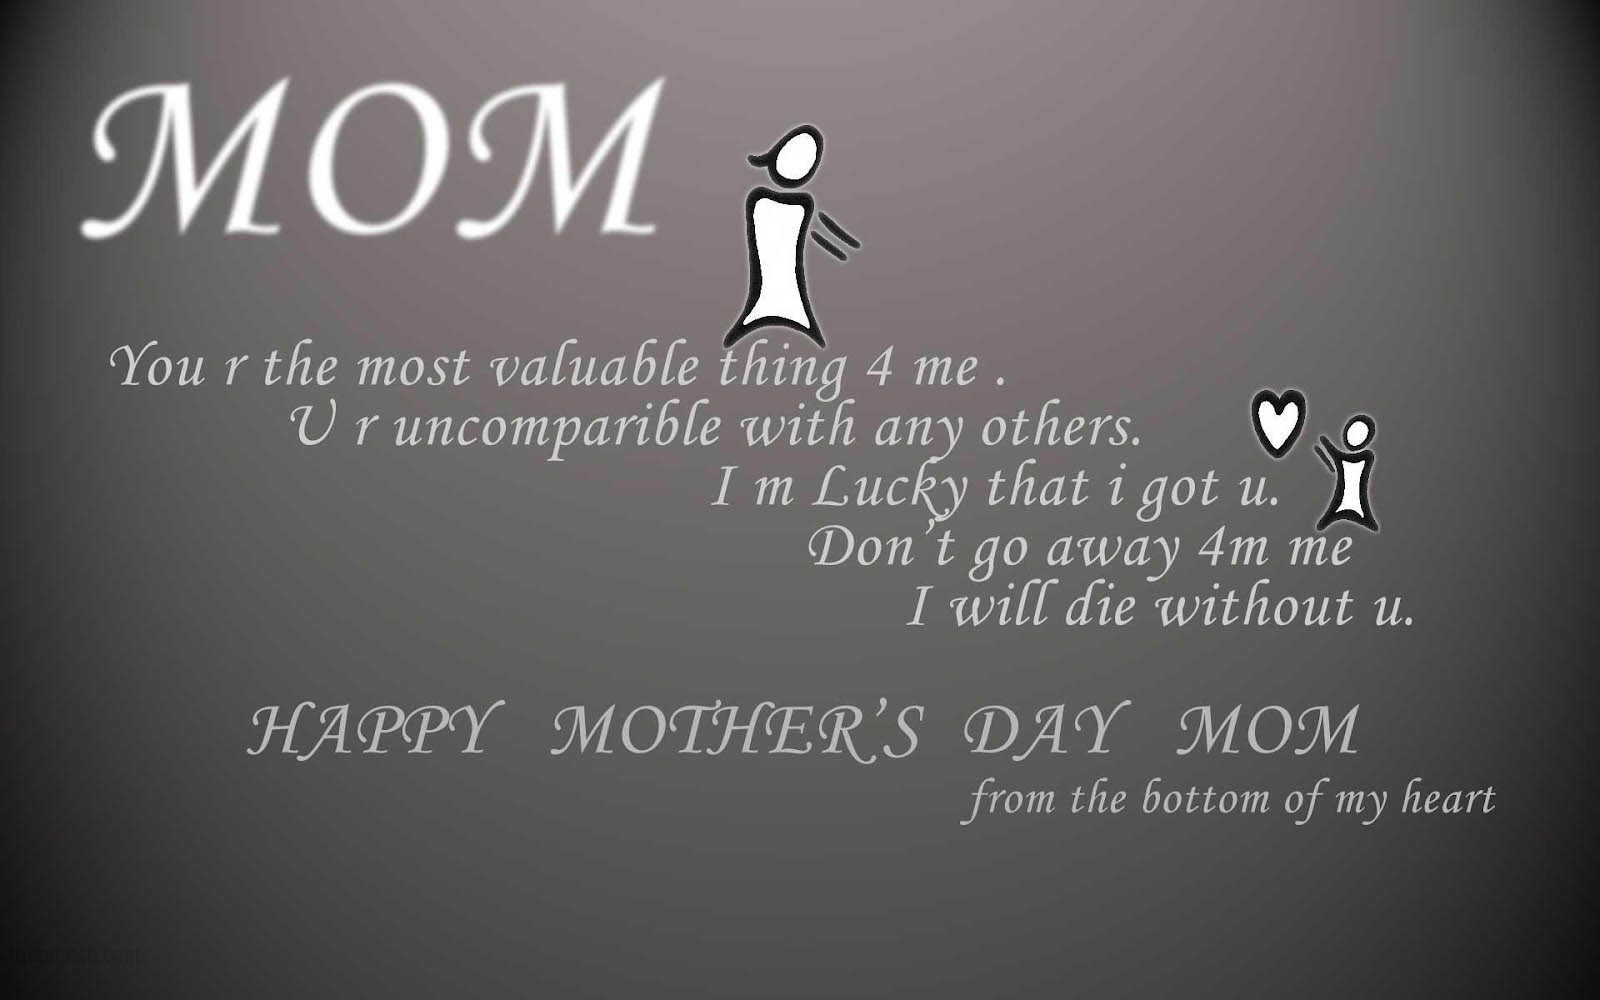 You Are Watching The Mother s Day Quotes Wallpapers May 12 Mother s Day Quotes Happy Mother s Day Beautiful Quotes Free Mother s Day Nice Quotes